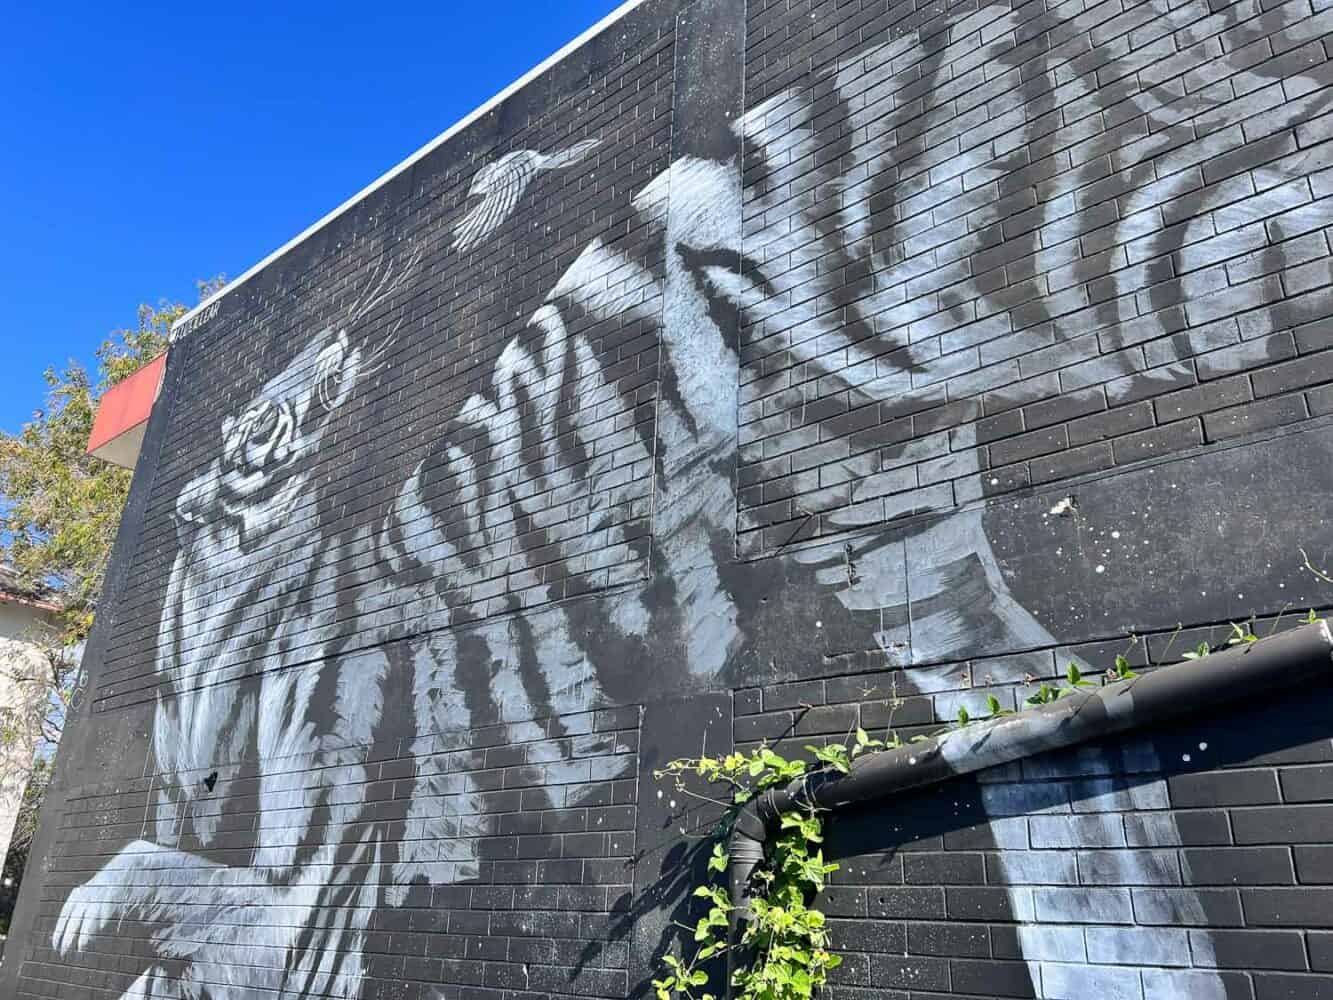 Black and white painting of a tiger, street art in Caloundra, Queensland, Australia